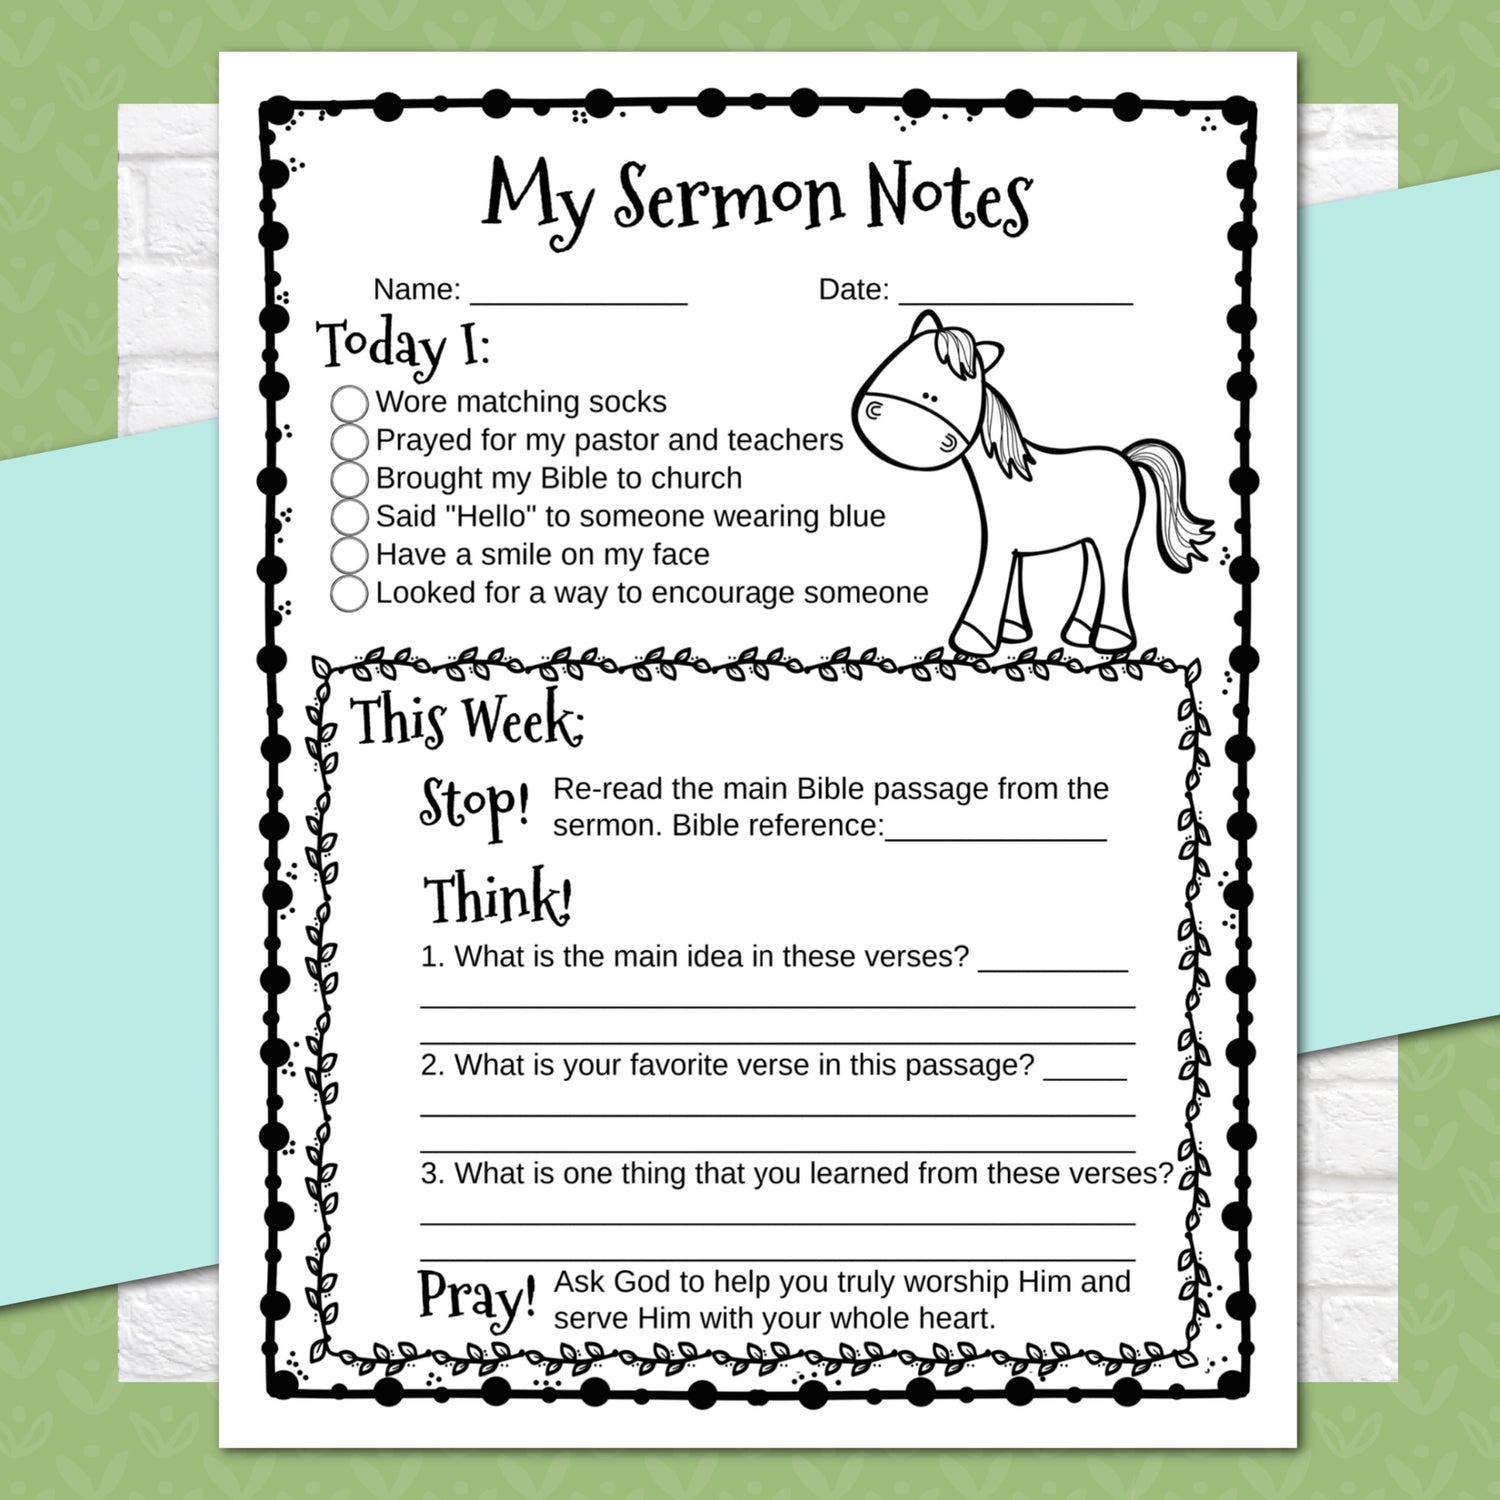 Animal Sermon Notes for Kids, Elementary Level, Instant Download